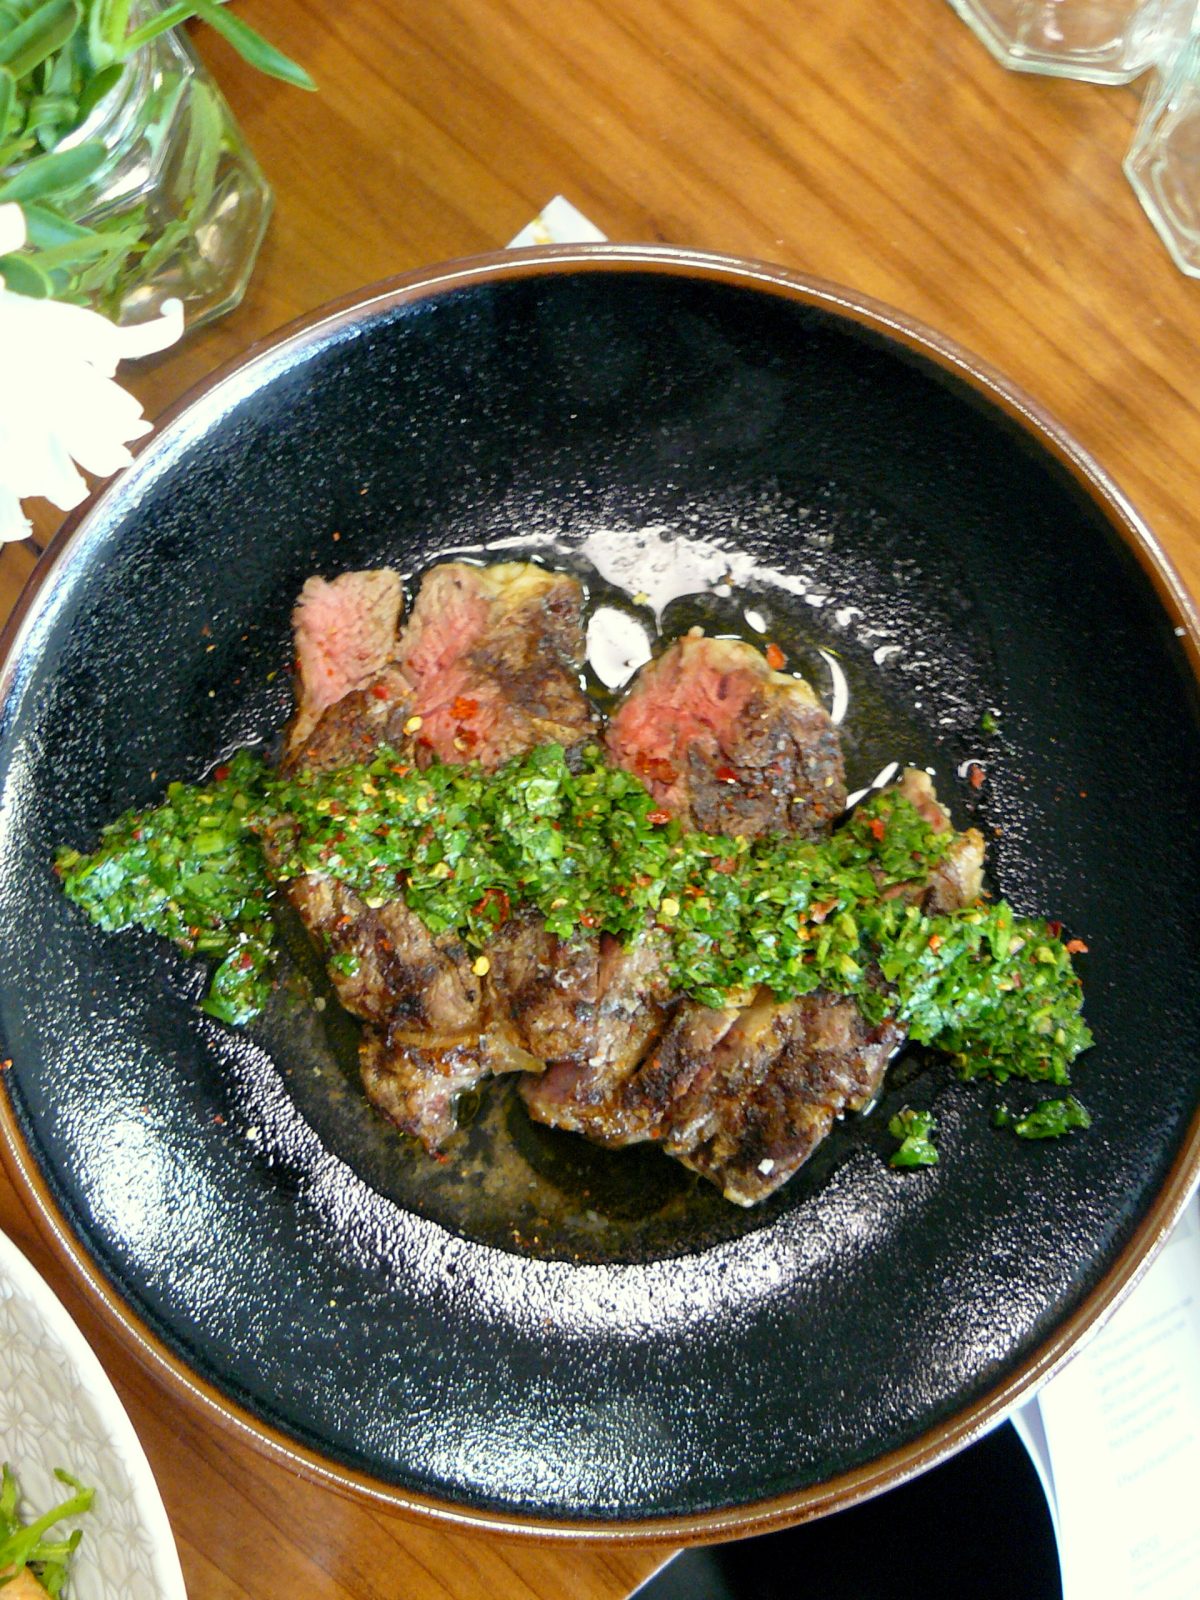 Dry Aged Steak with Chimichurri Salsa. The dry aged steak from Gateway Estate is just melt-in-your-mouth and pairs brilliantly with the herby and refreshing flavours of the chimichurri salsa. 